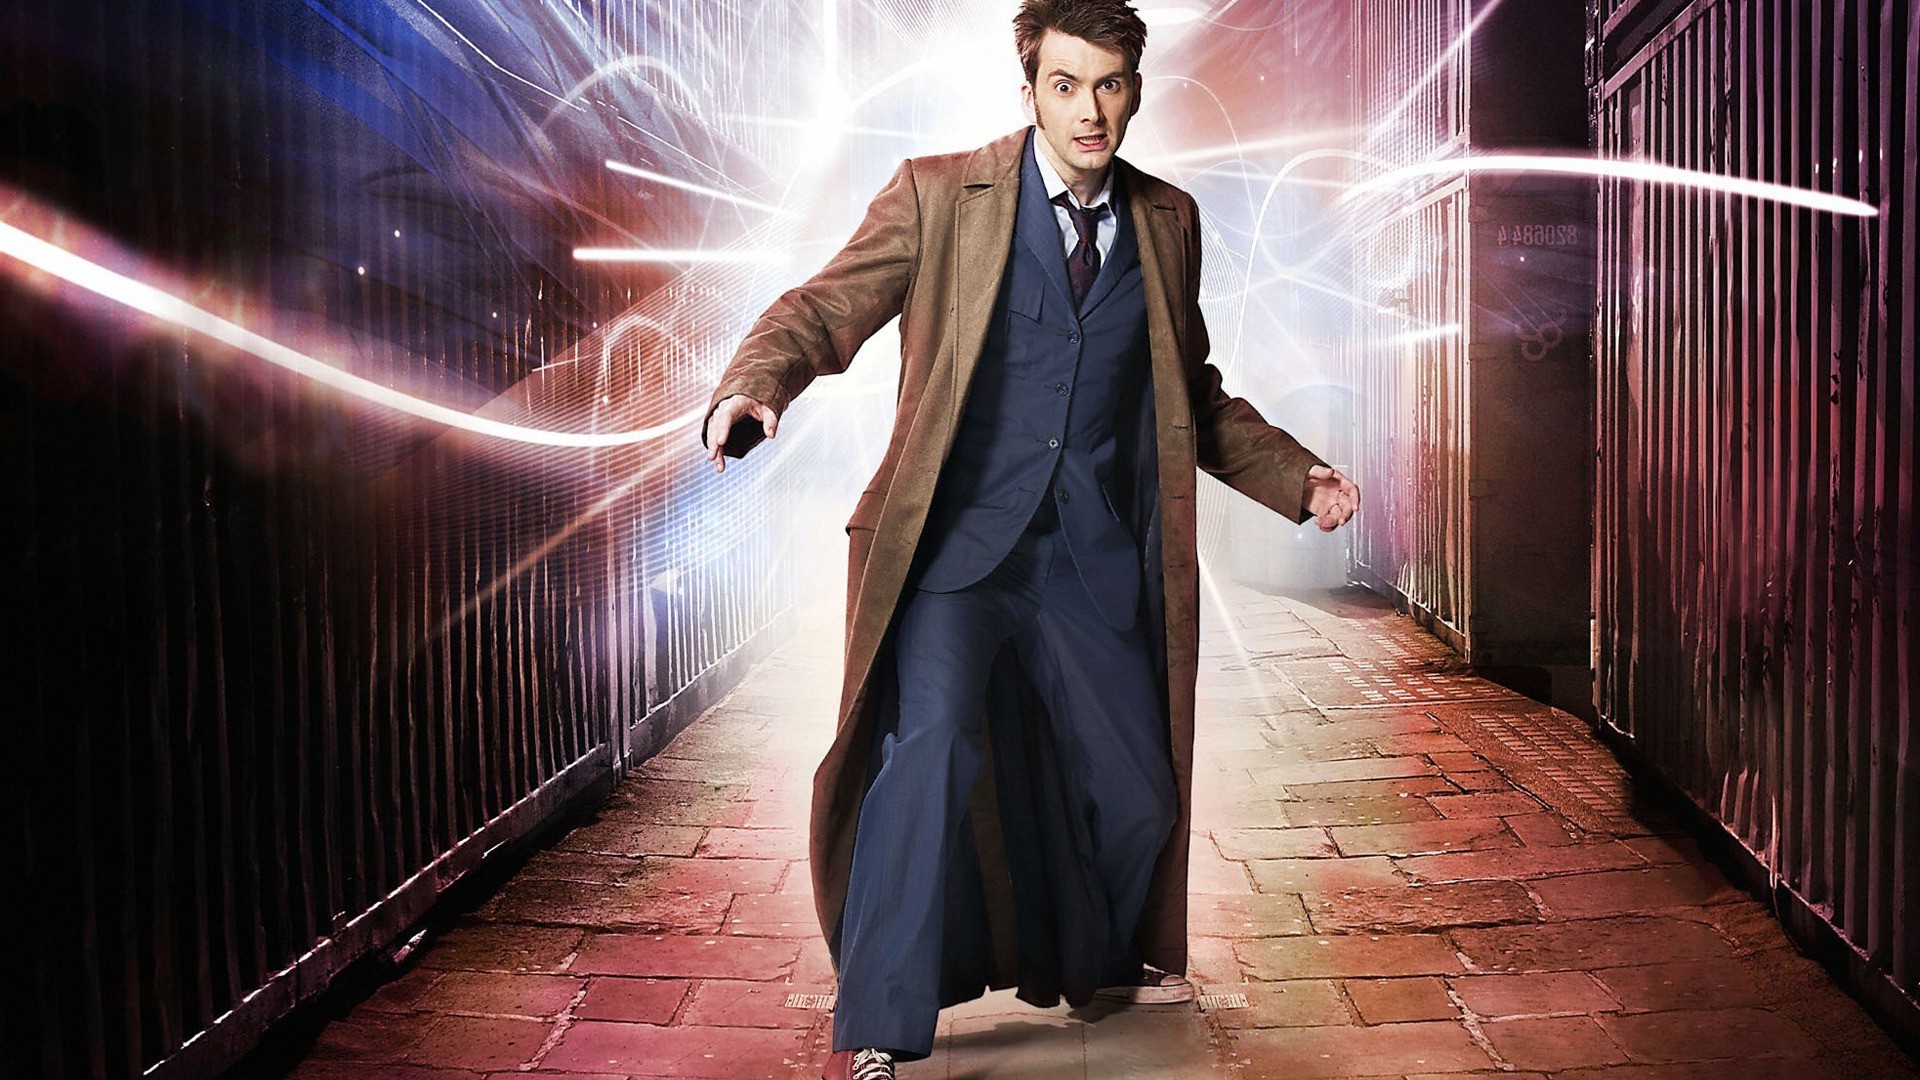 X doctor who the doctor david tennant tenth doctor wallpaper jpg kb